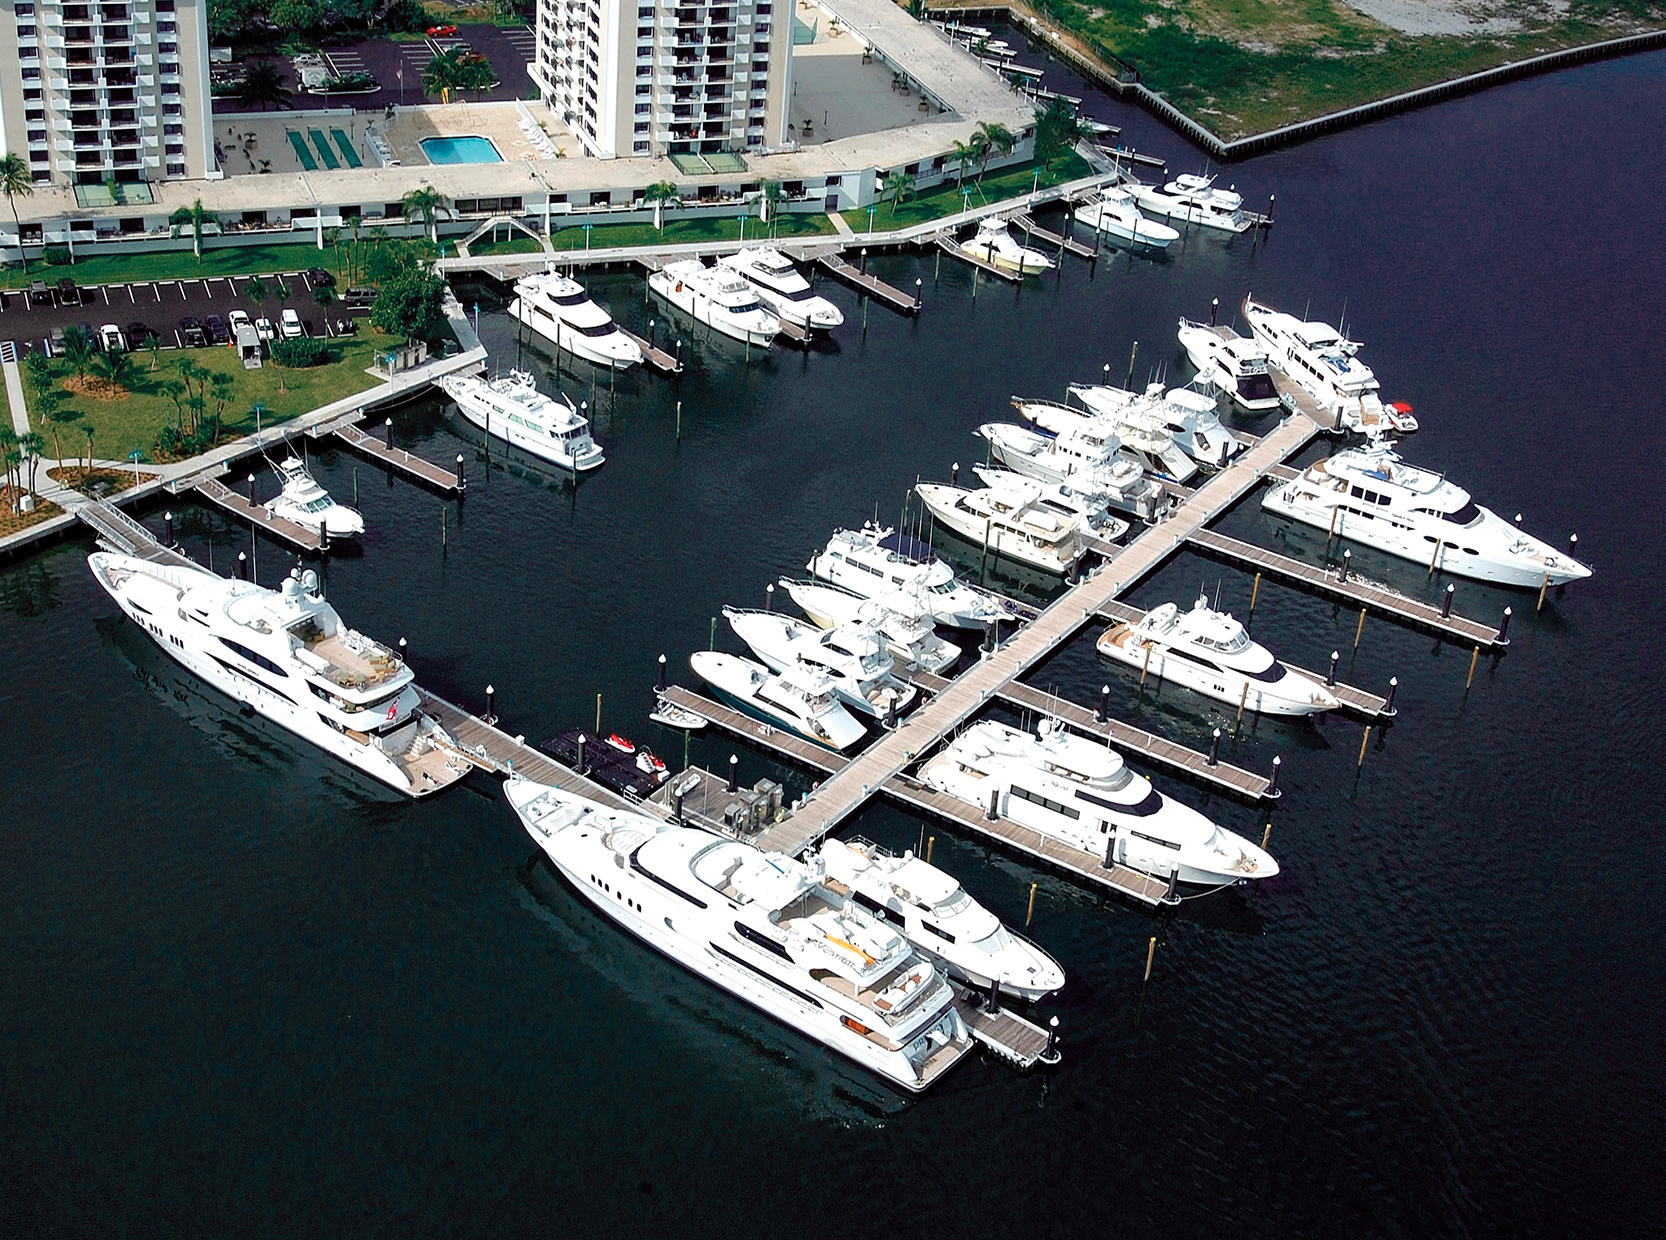 Small and large watercraft moored on modular floating docks in Florida